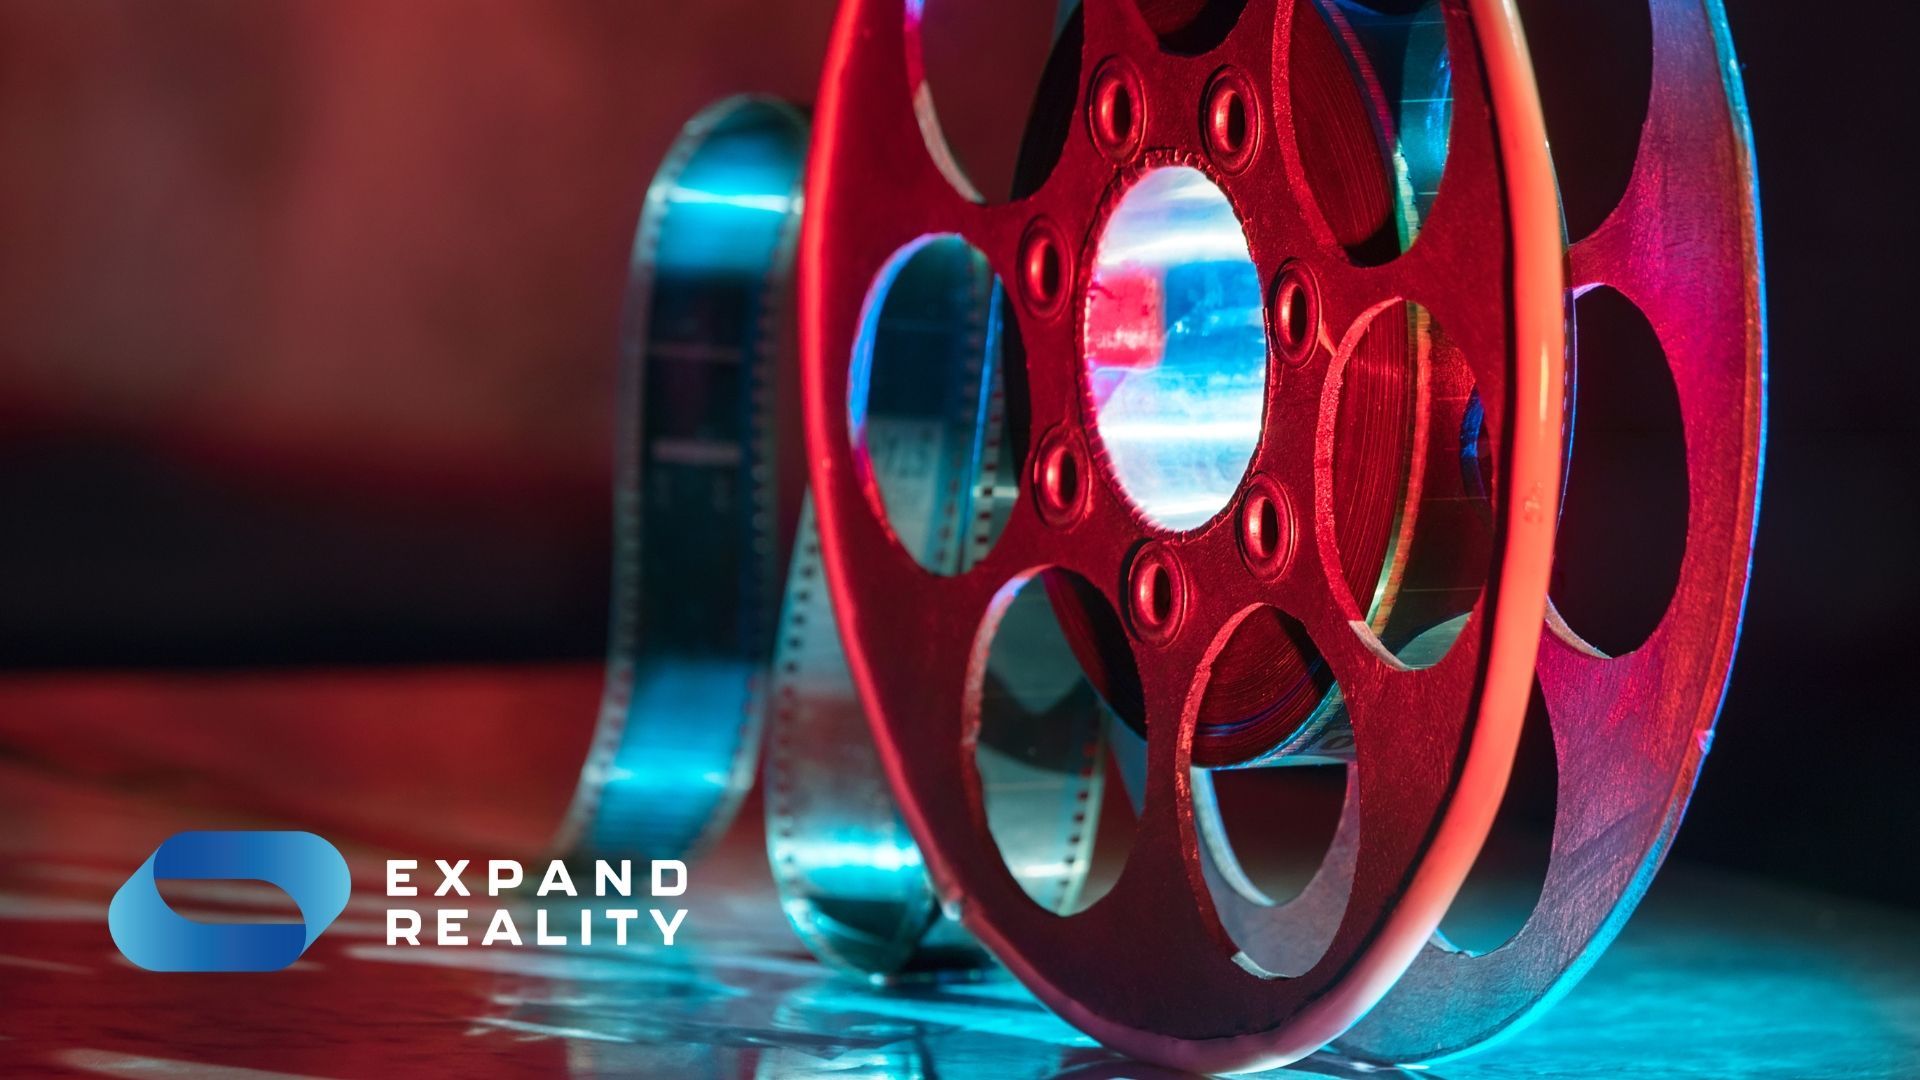 Augmented reality glasses have the power to change the cinema-going experience as we know it. How? Read all about it in our handy 5-minute guide.